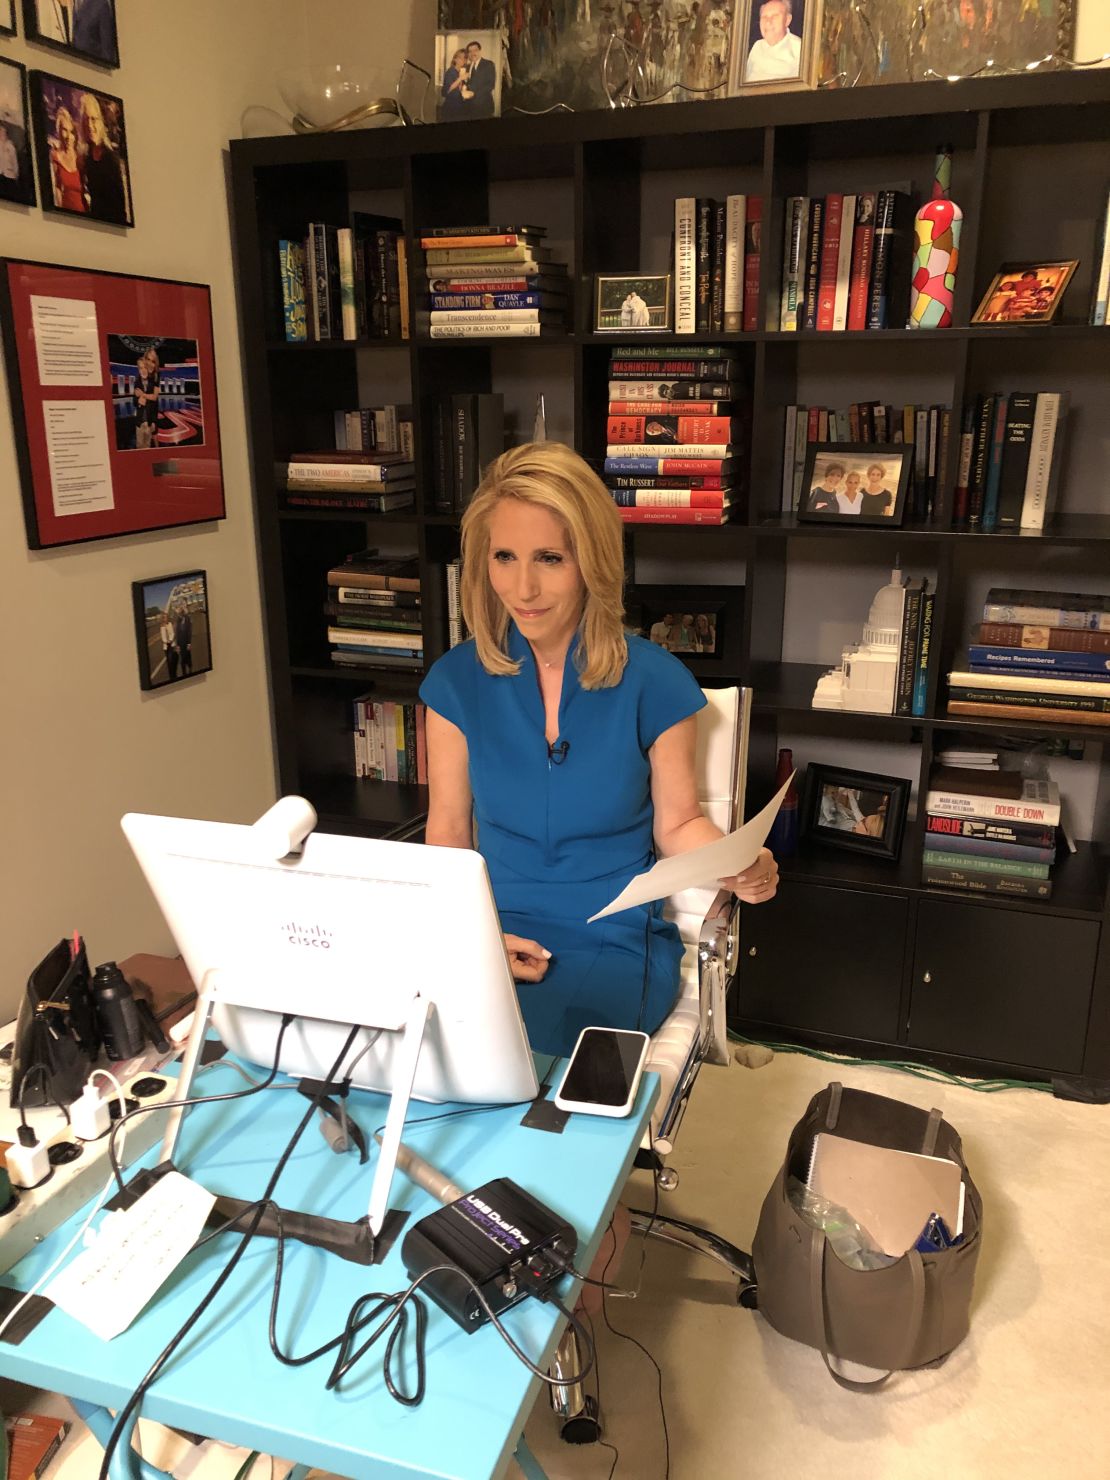 Bash has set up a studio in her basement for live reporting and interviews.